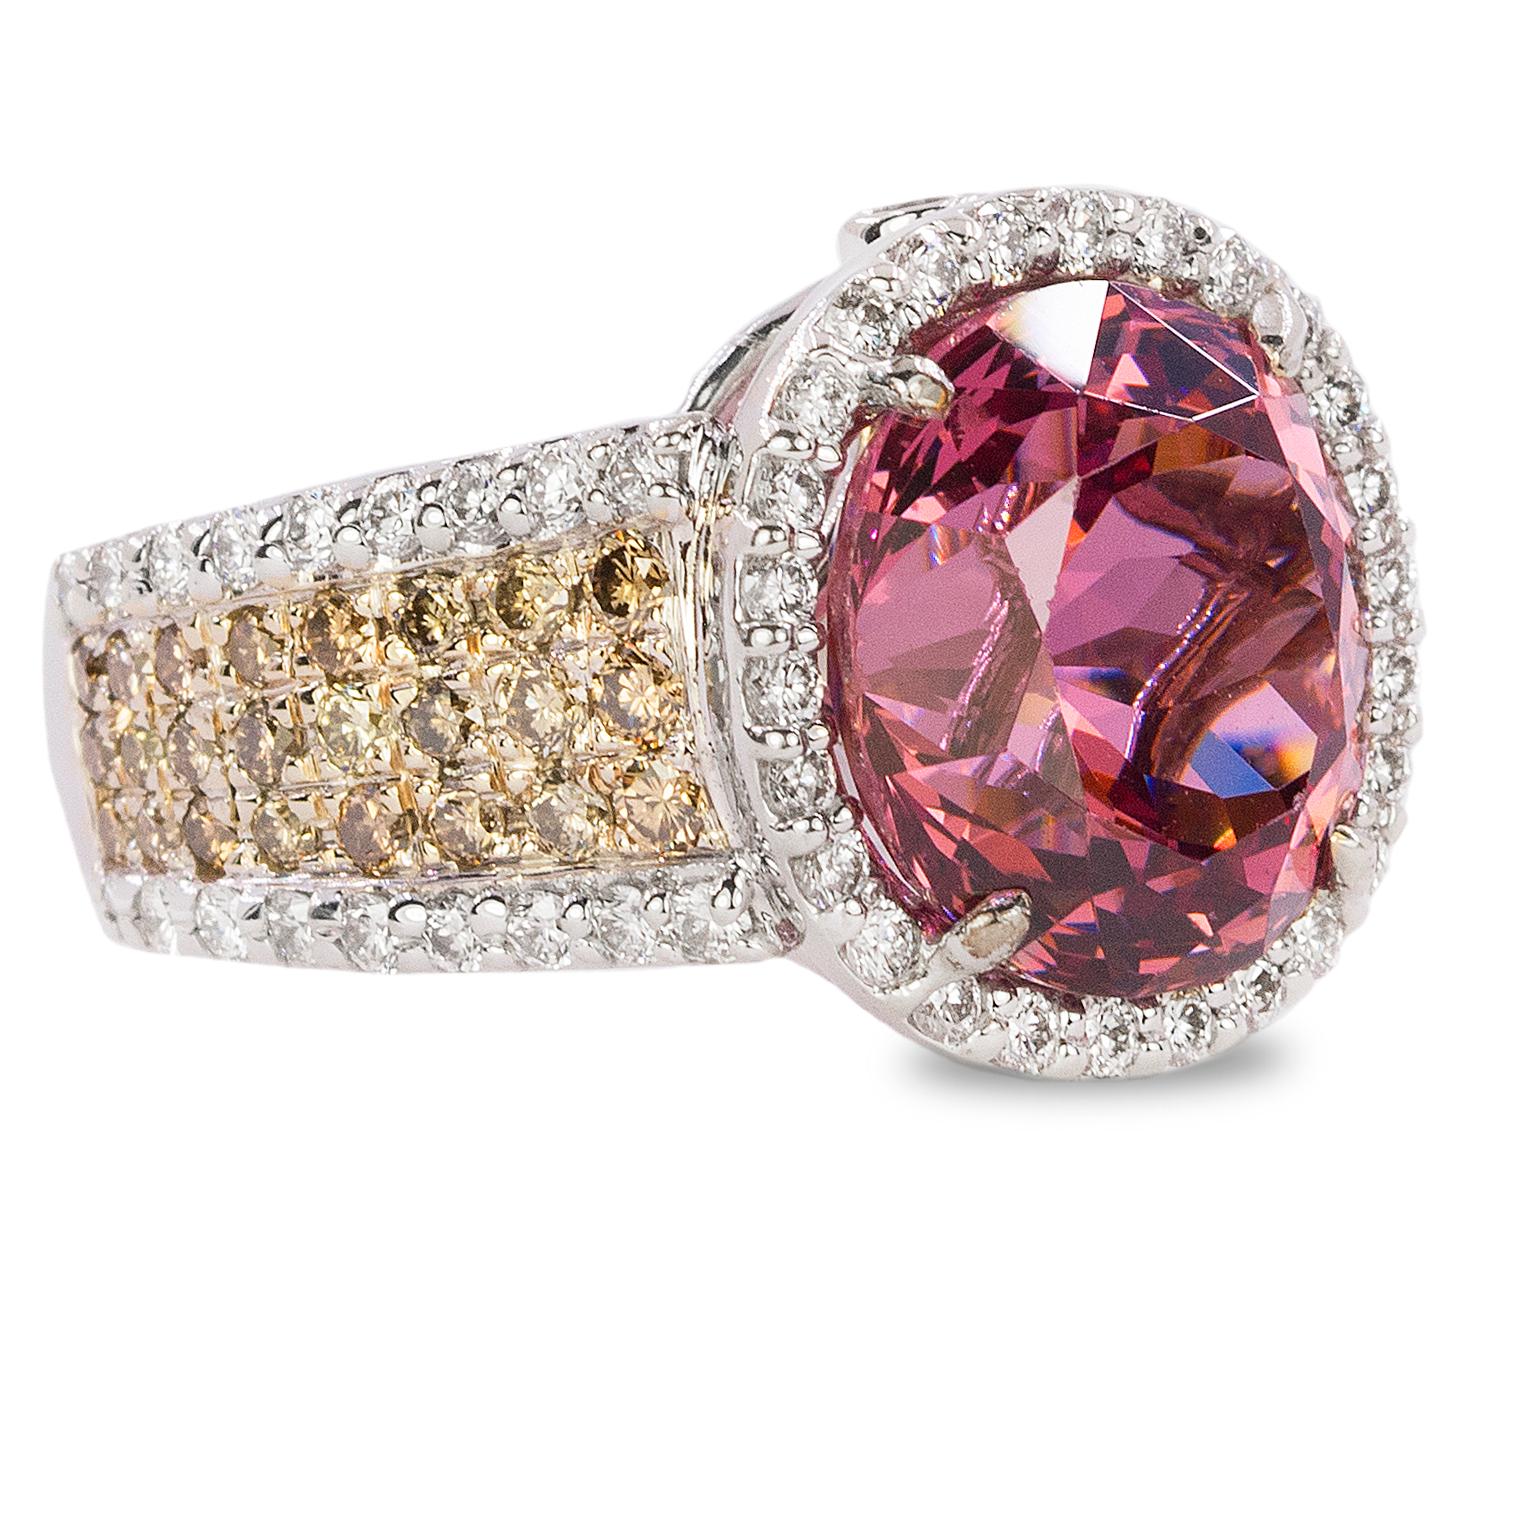 18k Ring with 7.03 carat Rubellite Tourmaline and approximately 2.00 carat of white and champagn around brilliant diamonds.